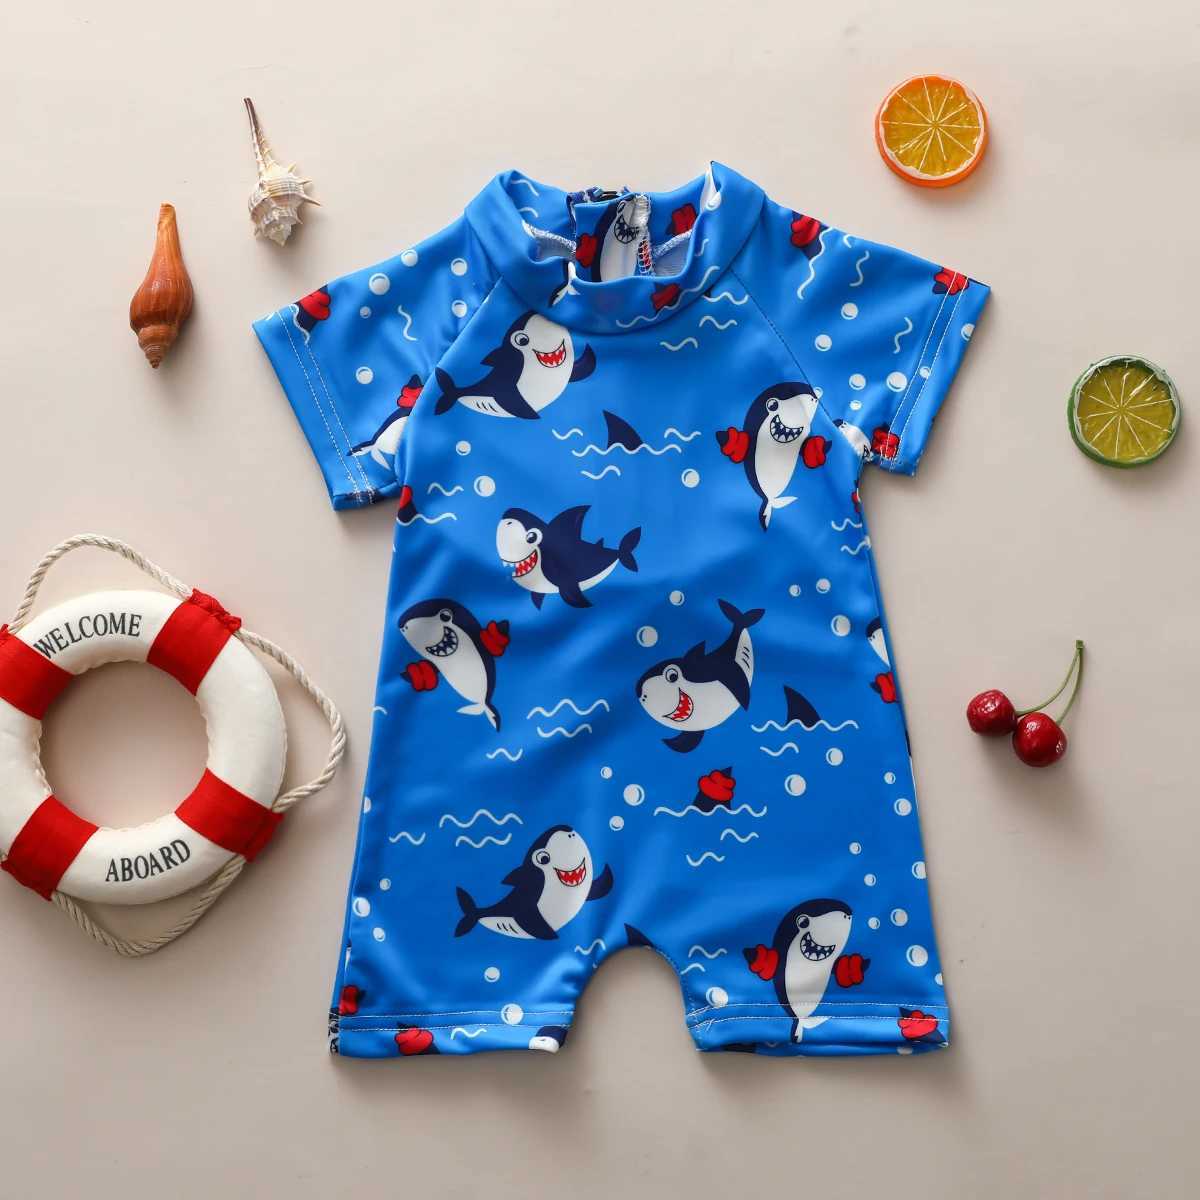 Two-Pieces VISGOGO Childrens and Boys Summer Swimsuit Rush Protective Cartoon Animal Pattern Short Sleeve Zipper Swimsuit Bathroom Beach SuitL2405